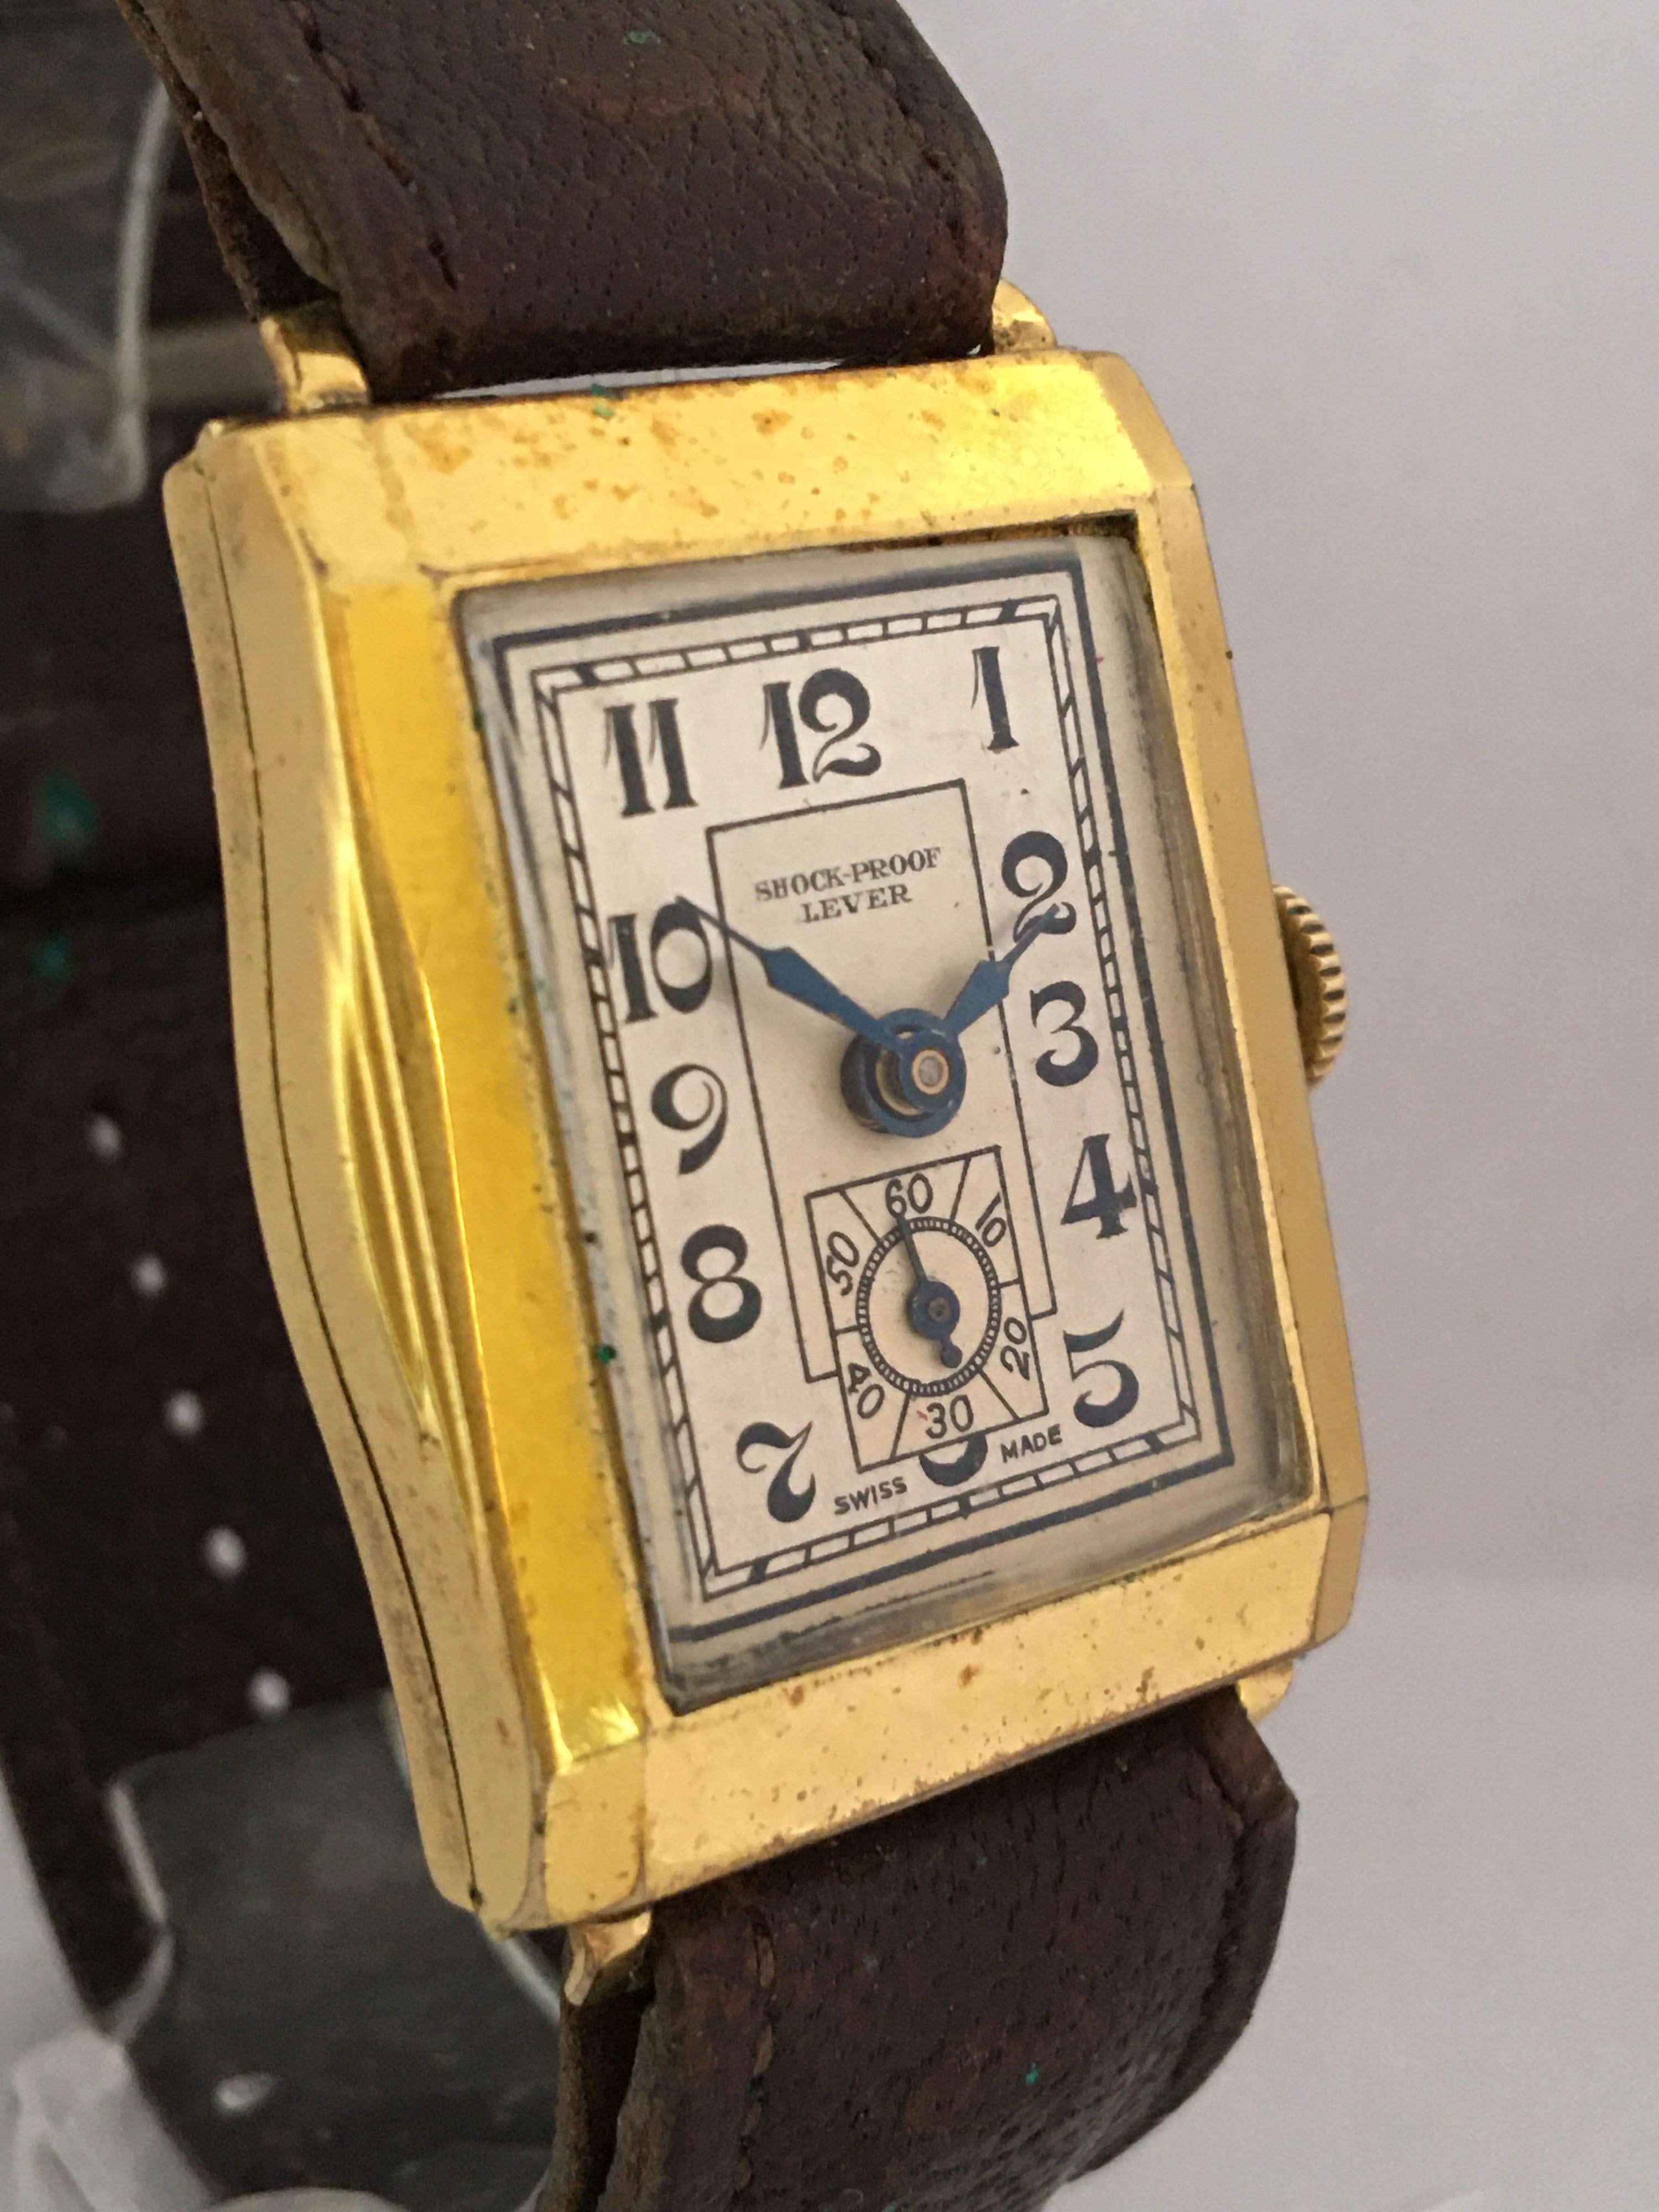 This beautiful pre-owned hand winding watch is in good working condition and it is ticking well. Visible signs of ageing and used with light marks on the glass and on the watch case as shown. The gold plated watch case has some tarnish and blemishes